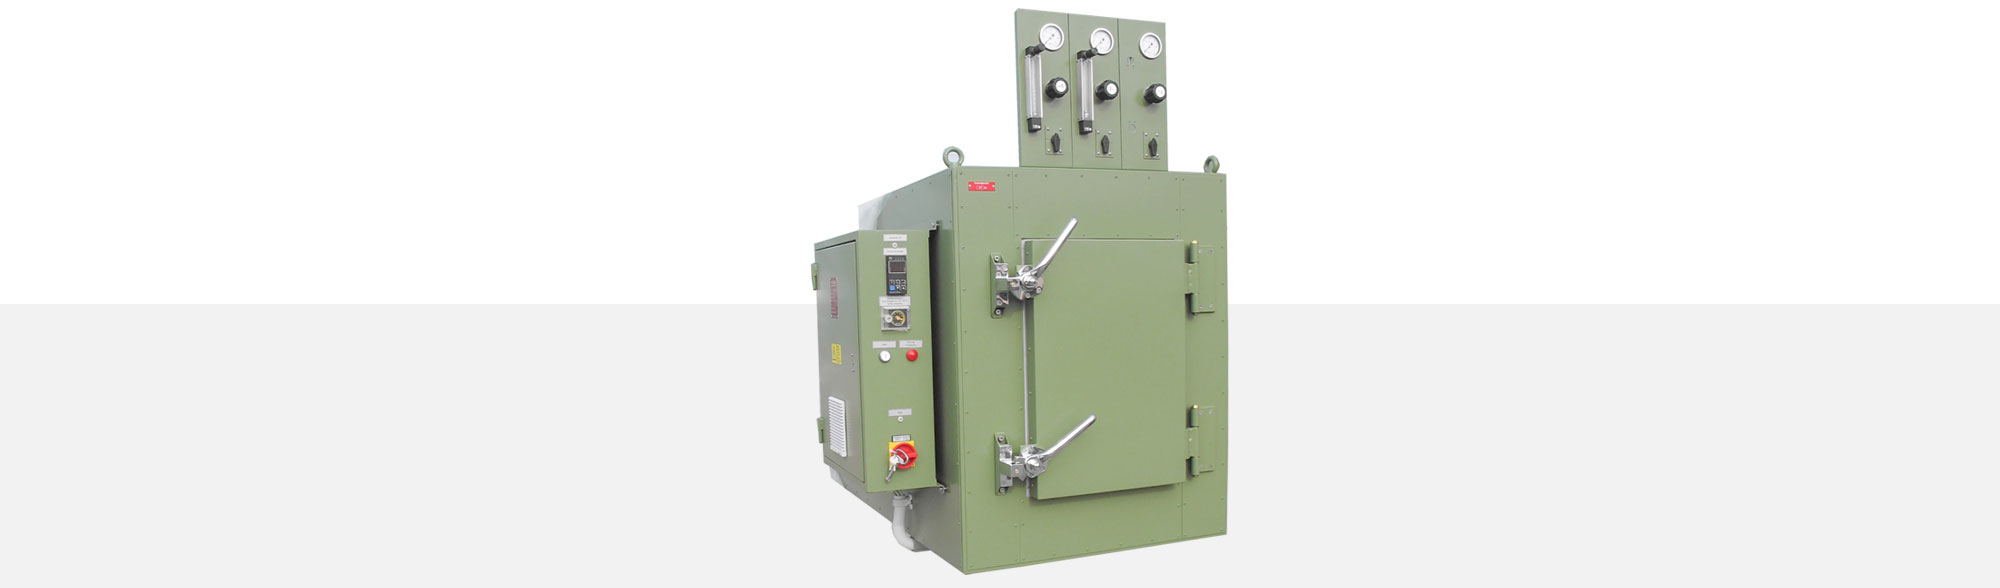 Heat Chambers are used for gentle, temperature accurate thermal treatment of components in the area of electronic power controller production. Inert-gas atmosphere supports this process.